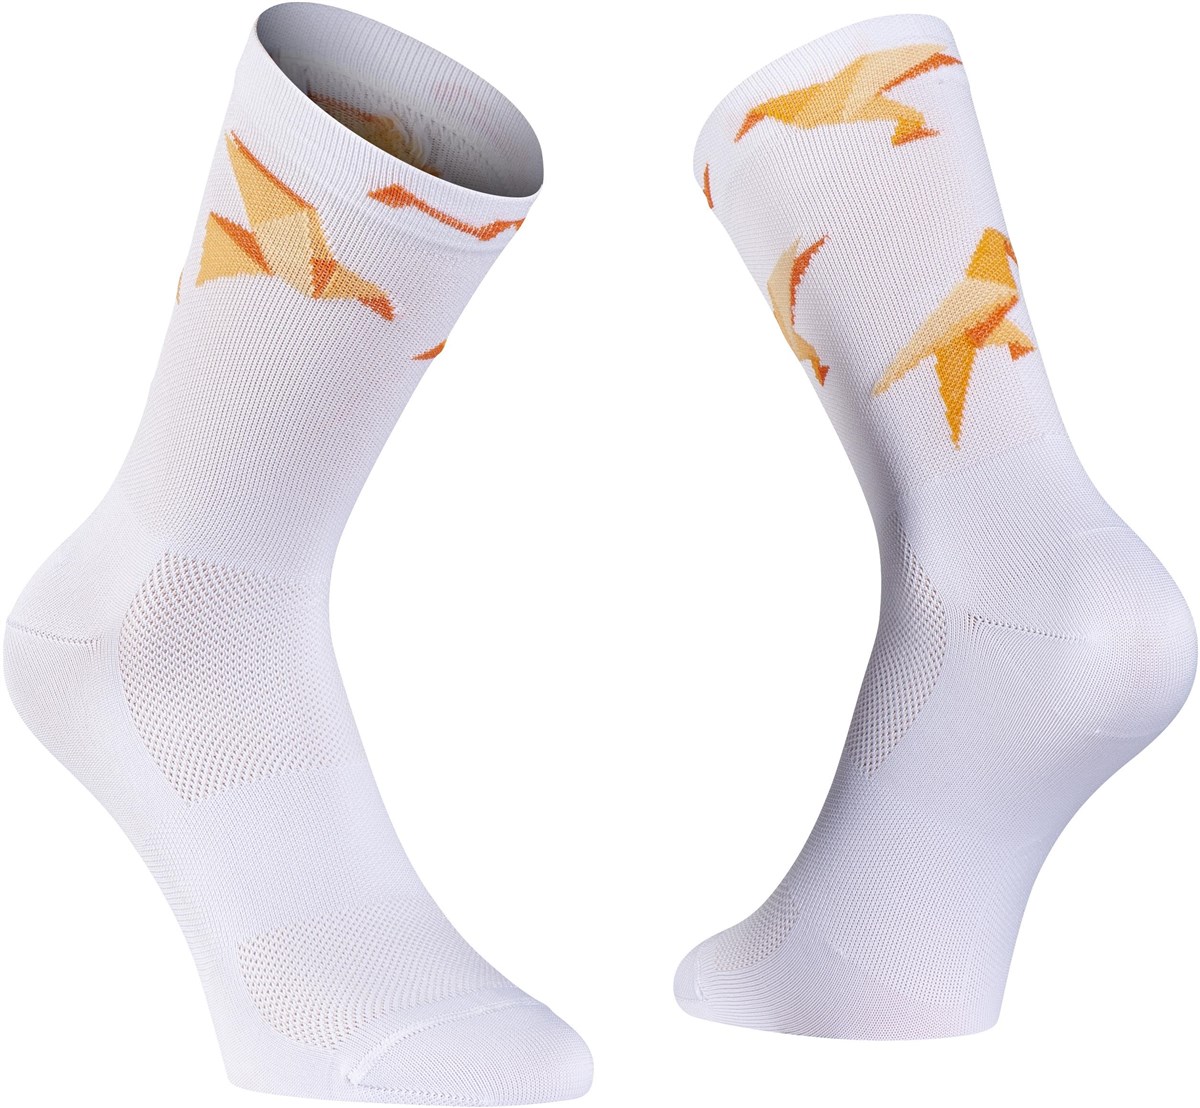 Northwave Origami Cycling Socks product image